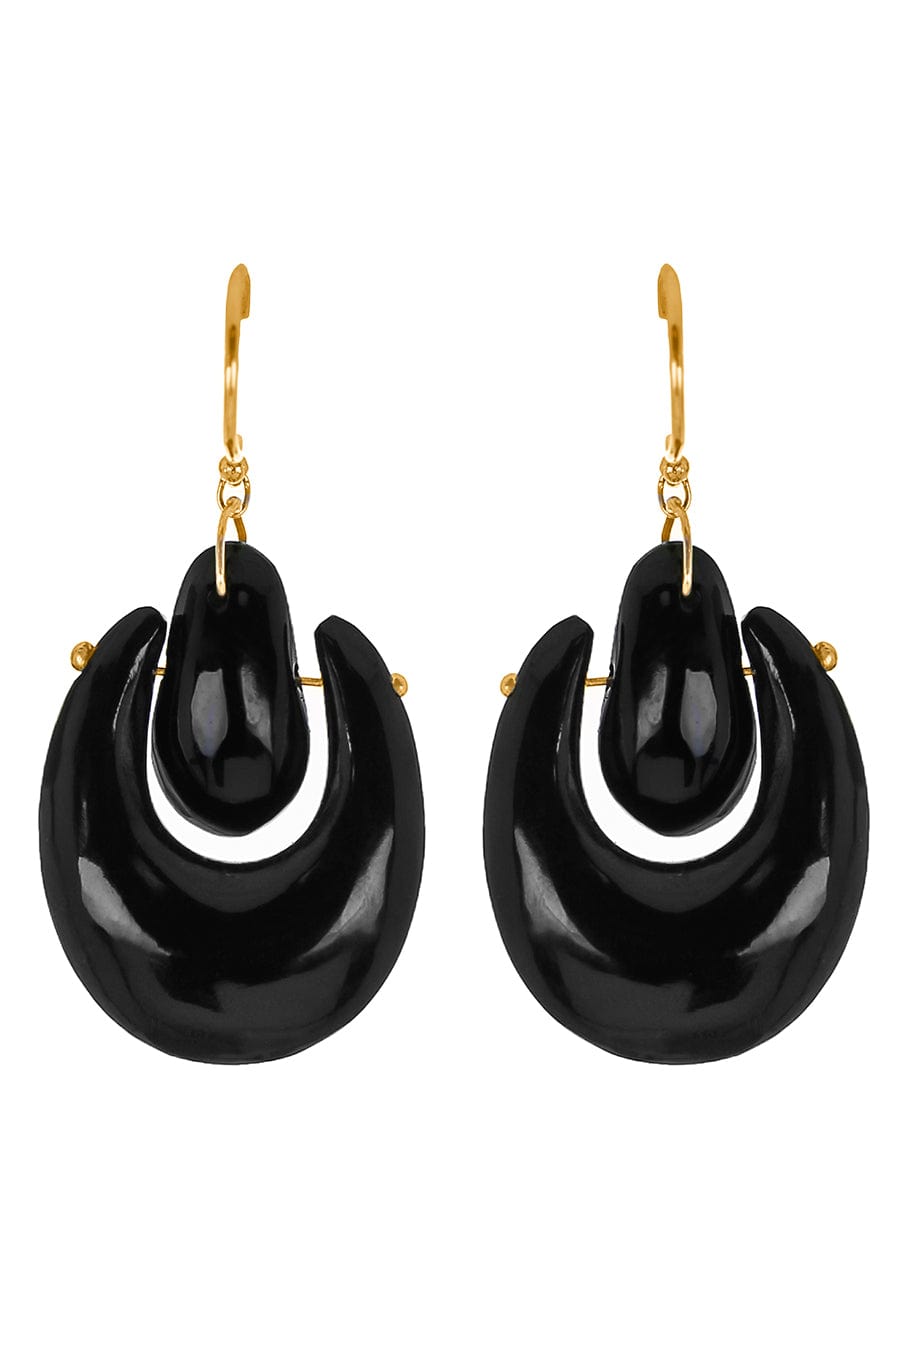 TEN THOUSAND THINGS-Small O'Keeffe Onyx Earrings-YELLOW GOLD